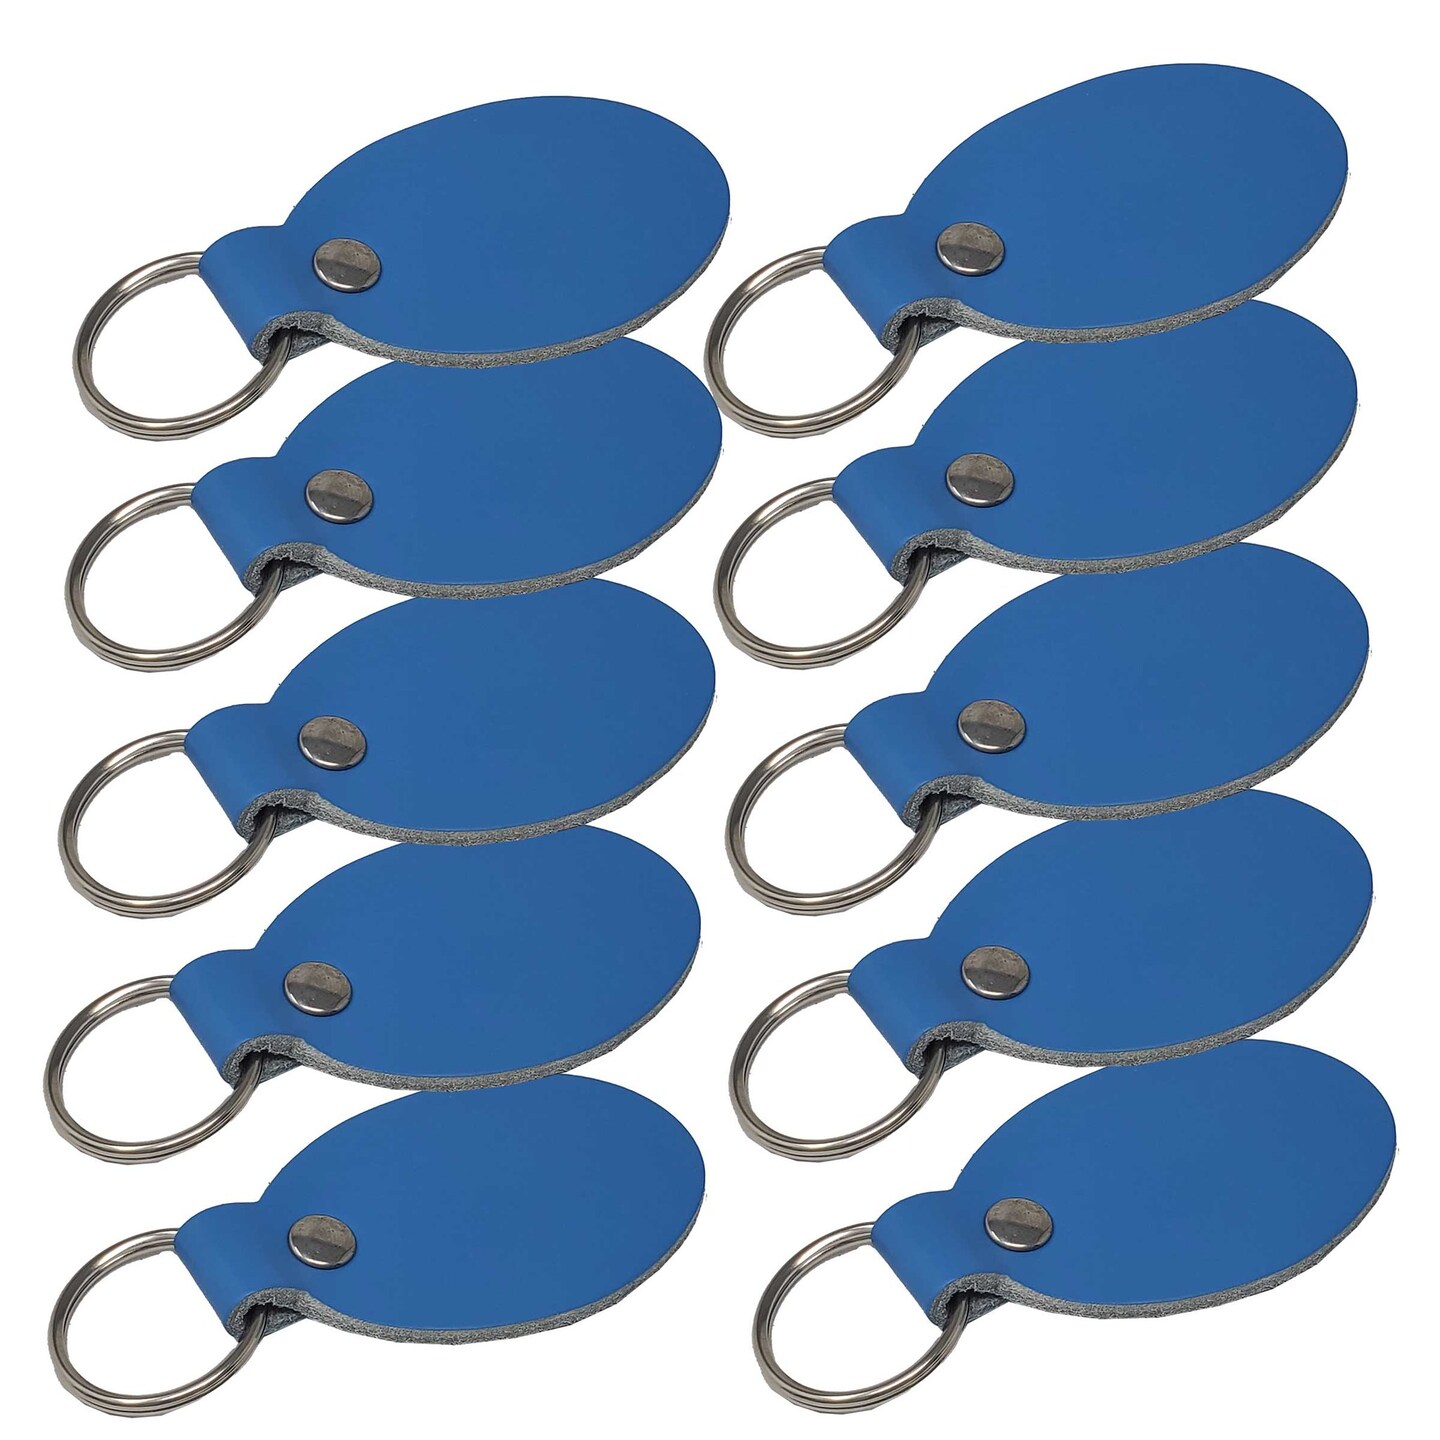 Leather Key Chains Blank 10 Pack - Hot Stamping, Embossing, Laser Engraving Ready-Promotional, Business gifts